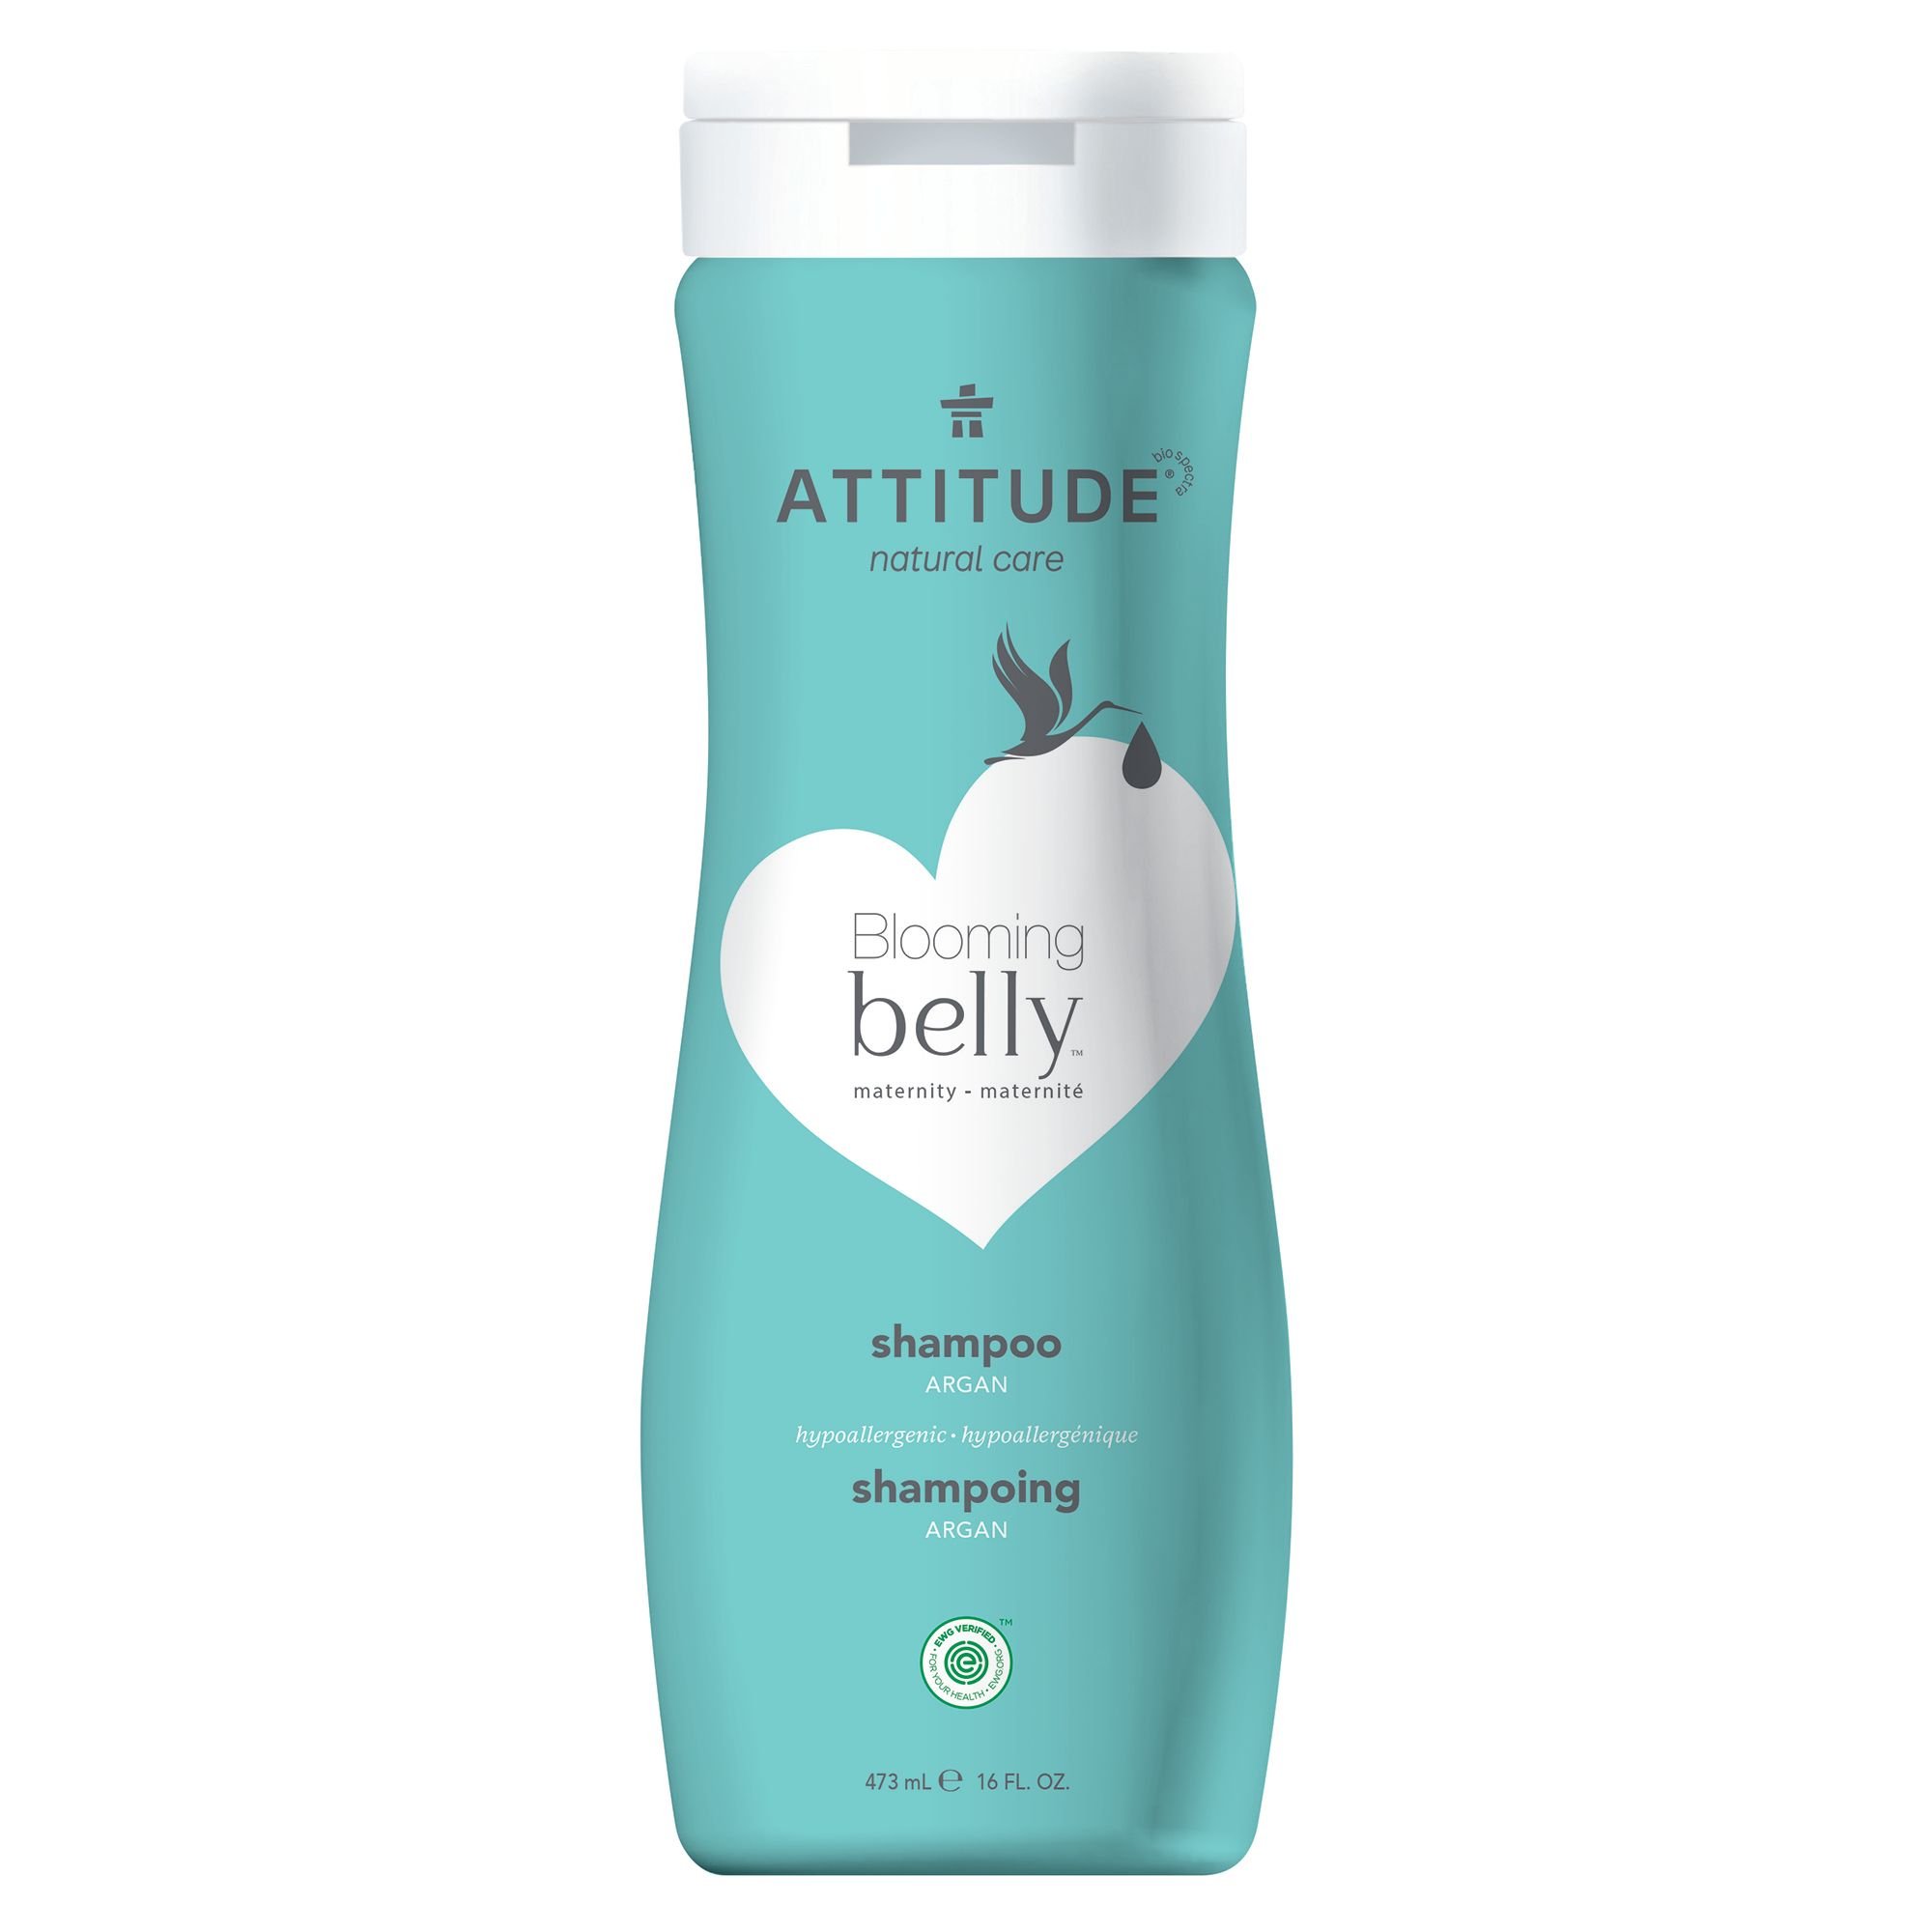 ATTITUDE Blooming Belly Shampoo